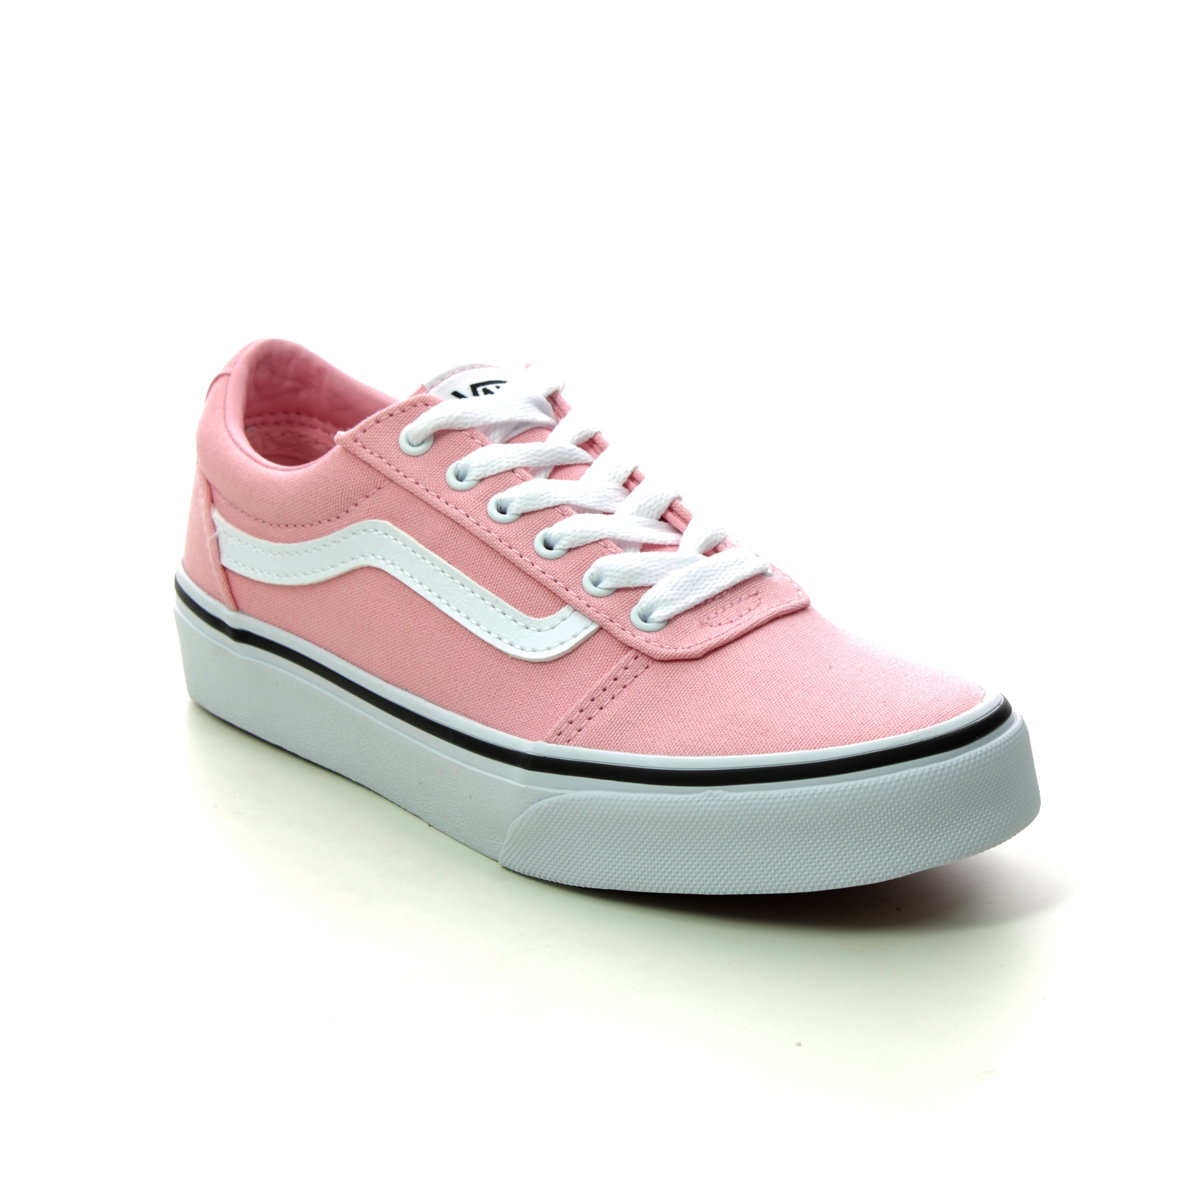 Vans Ward G Pink Kids girls trainers VN0A5KR79-DX1 in a Plain Canvas in Size 5